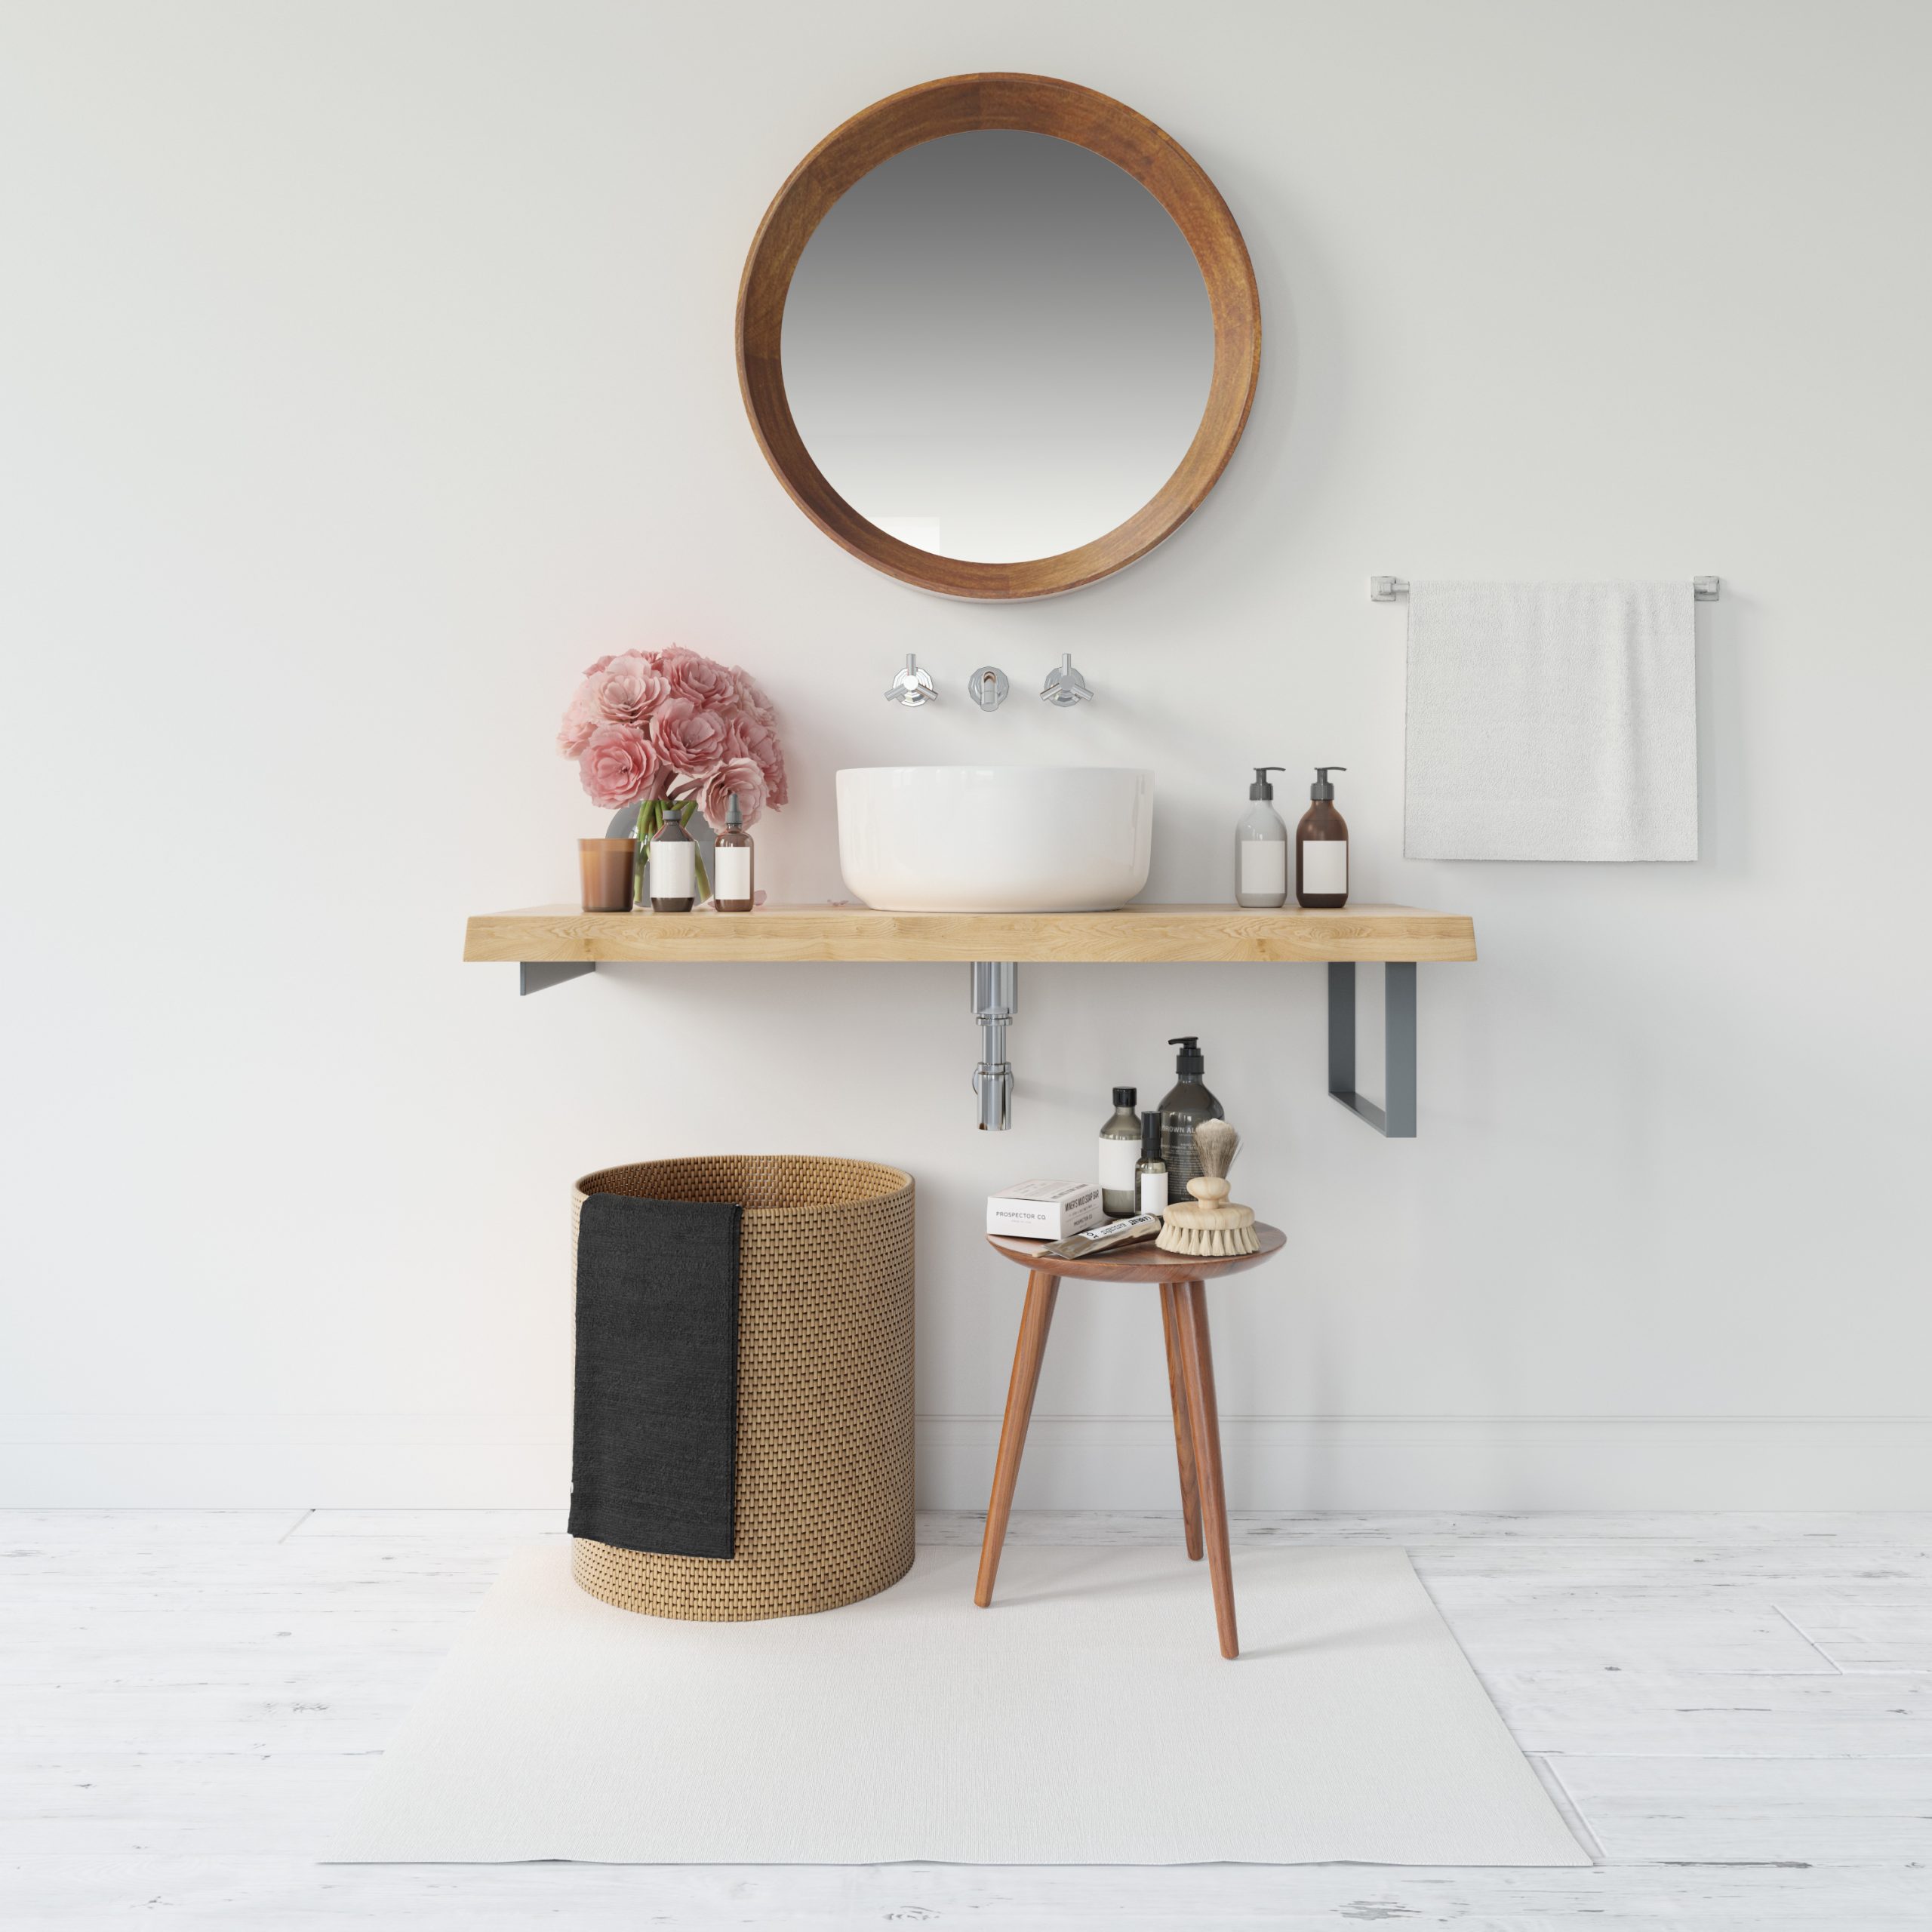 10 Wash Basin Designs that Complements your Interior